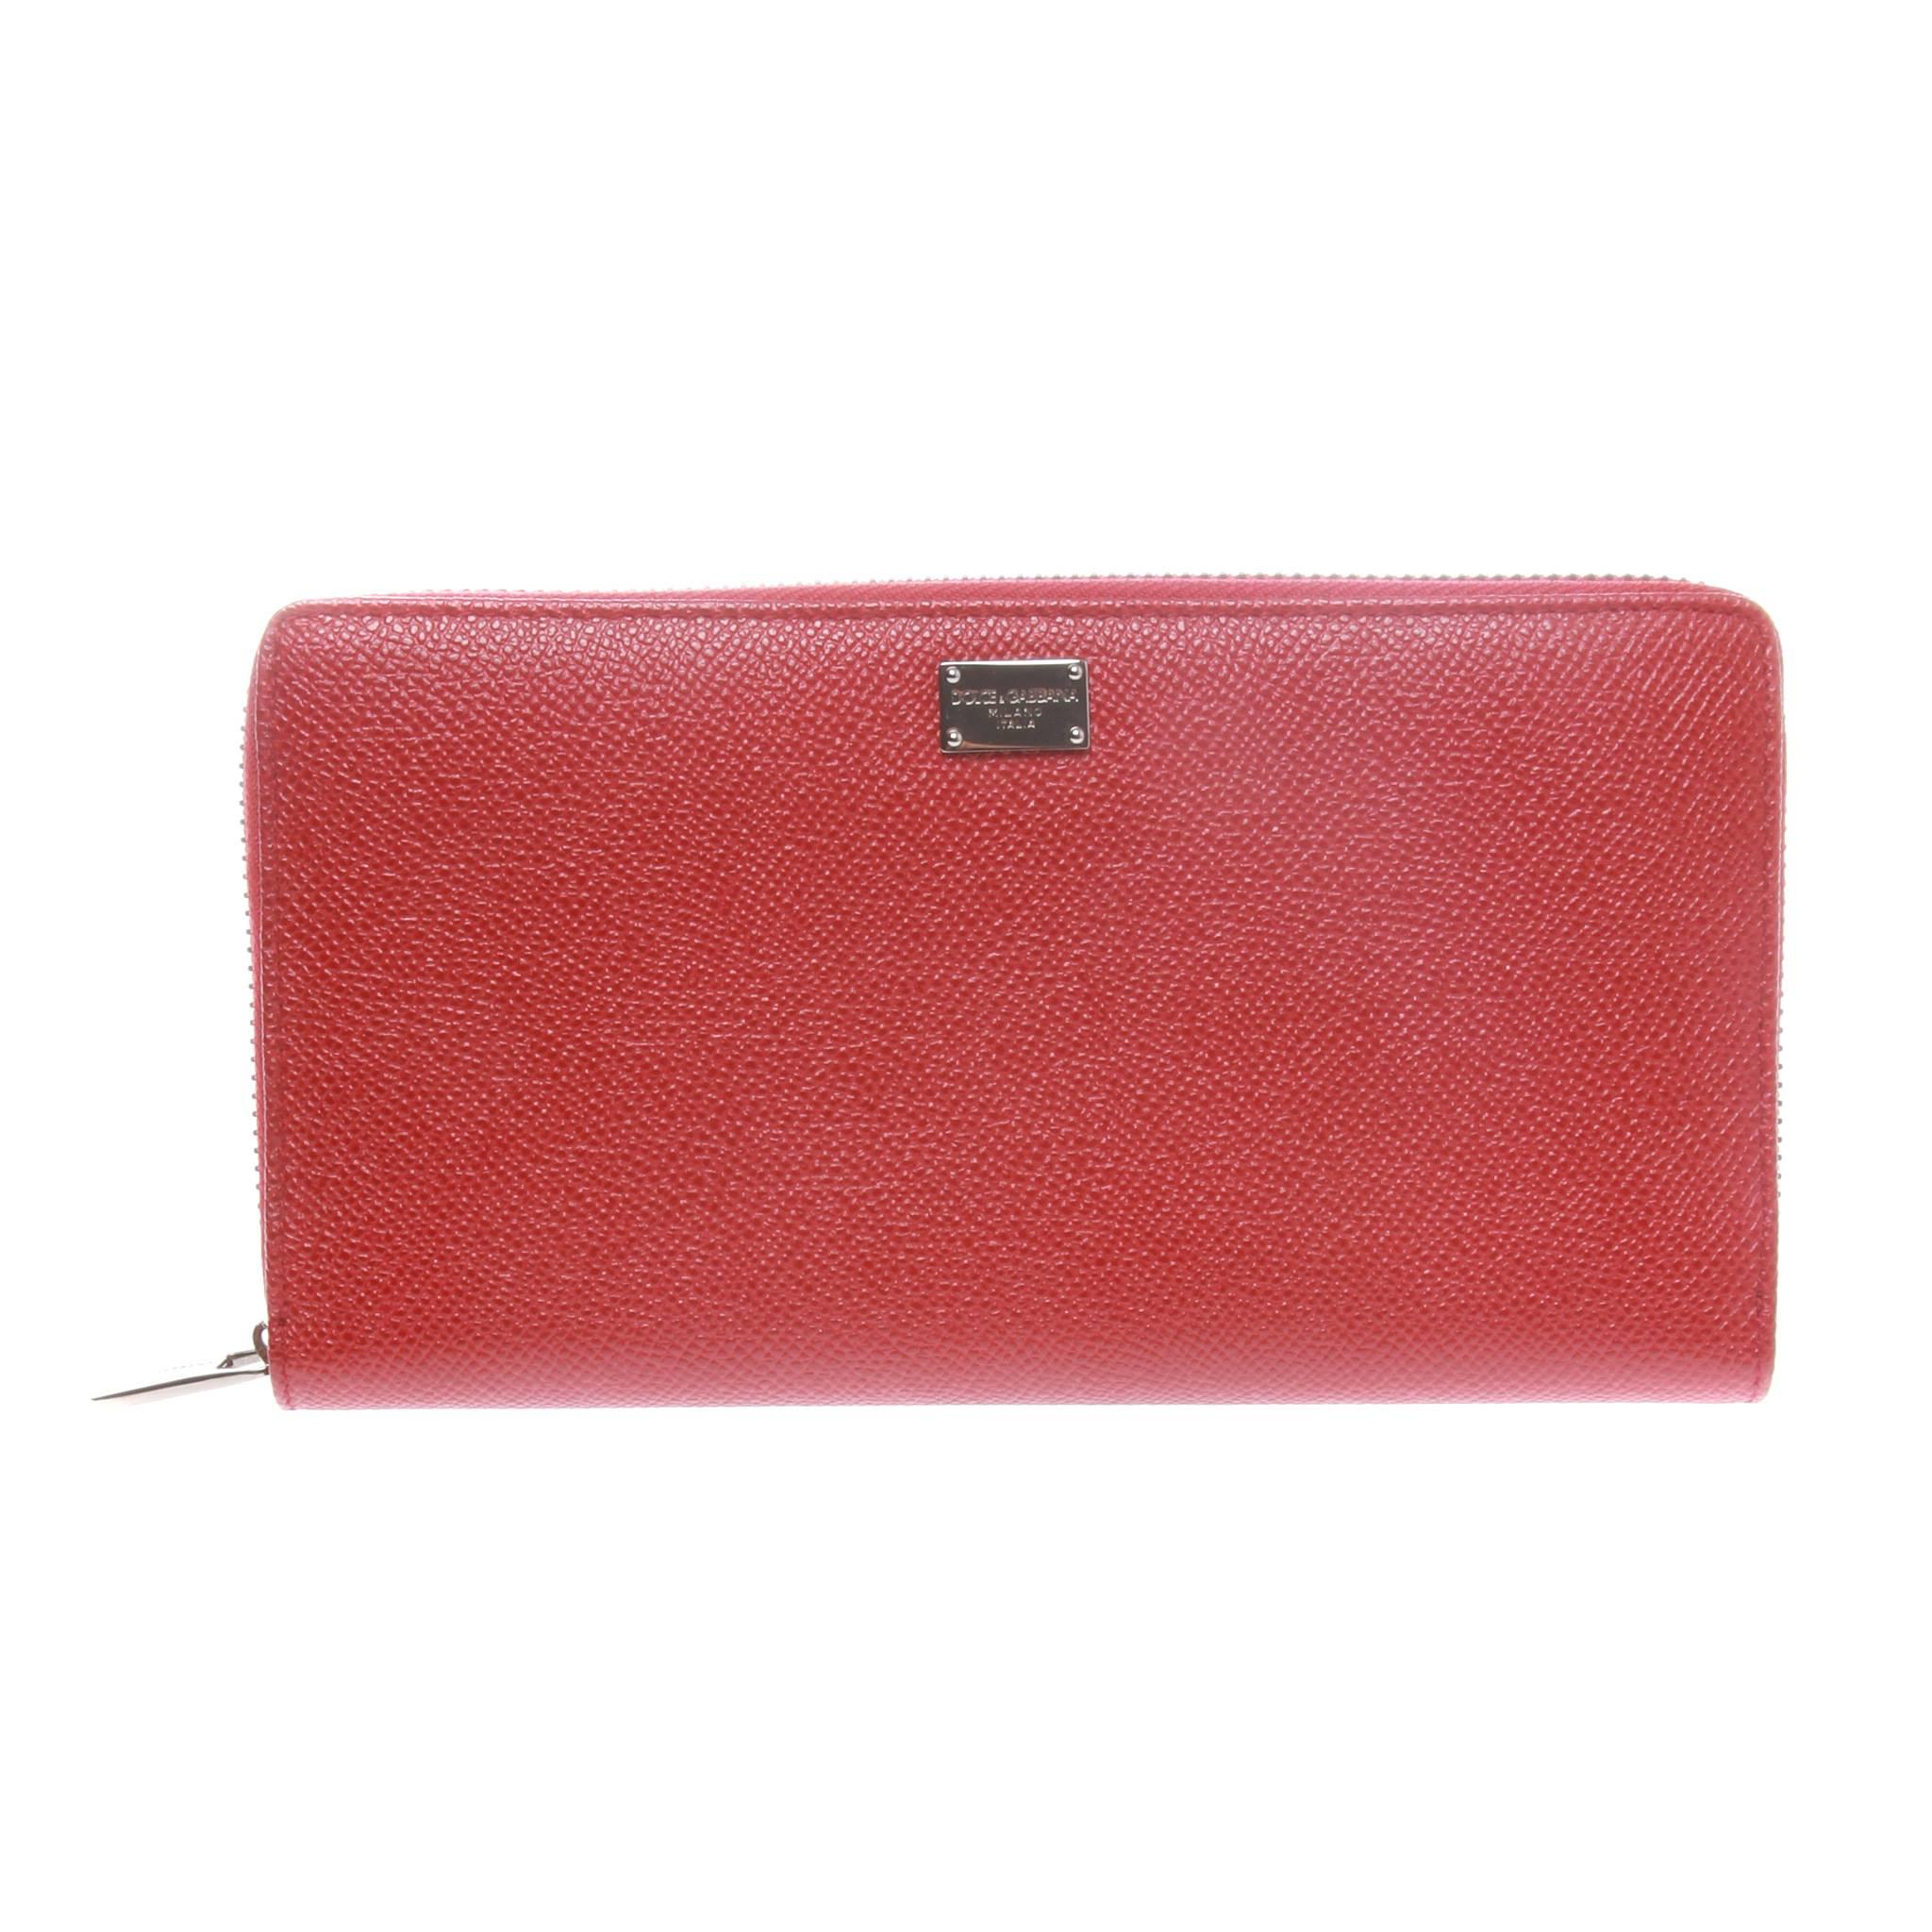 FINAL SALE

An eye-catching red adds zest to a textured calf leather zip around wallet designed with triple compartment,
adorns a zip up internal coin pouch, and silver hardware for keeping everyday essentials well-organized and secure.
Punctuate